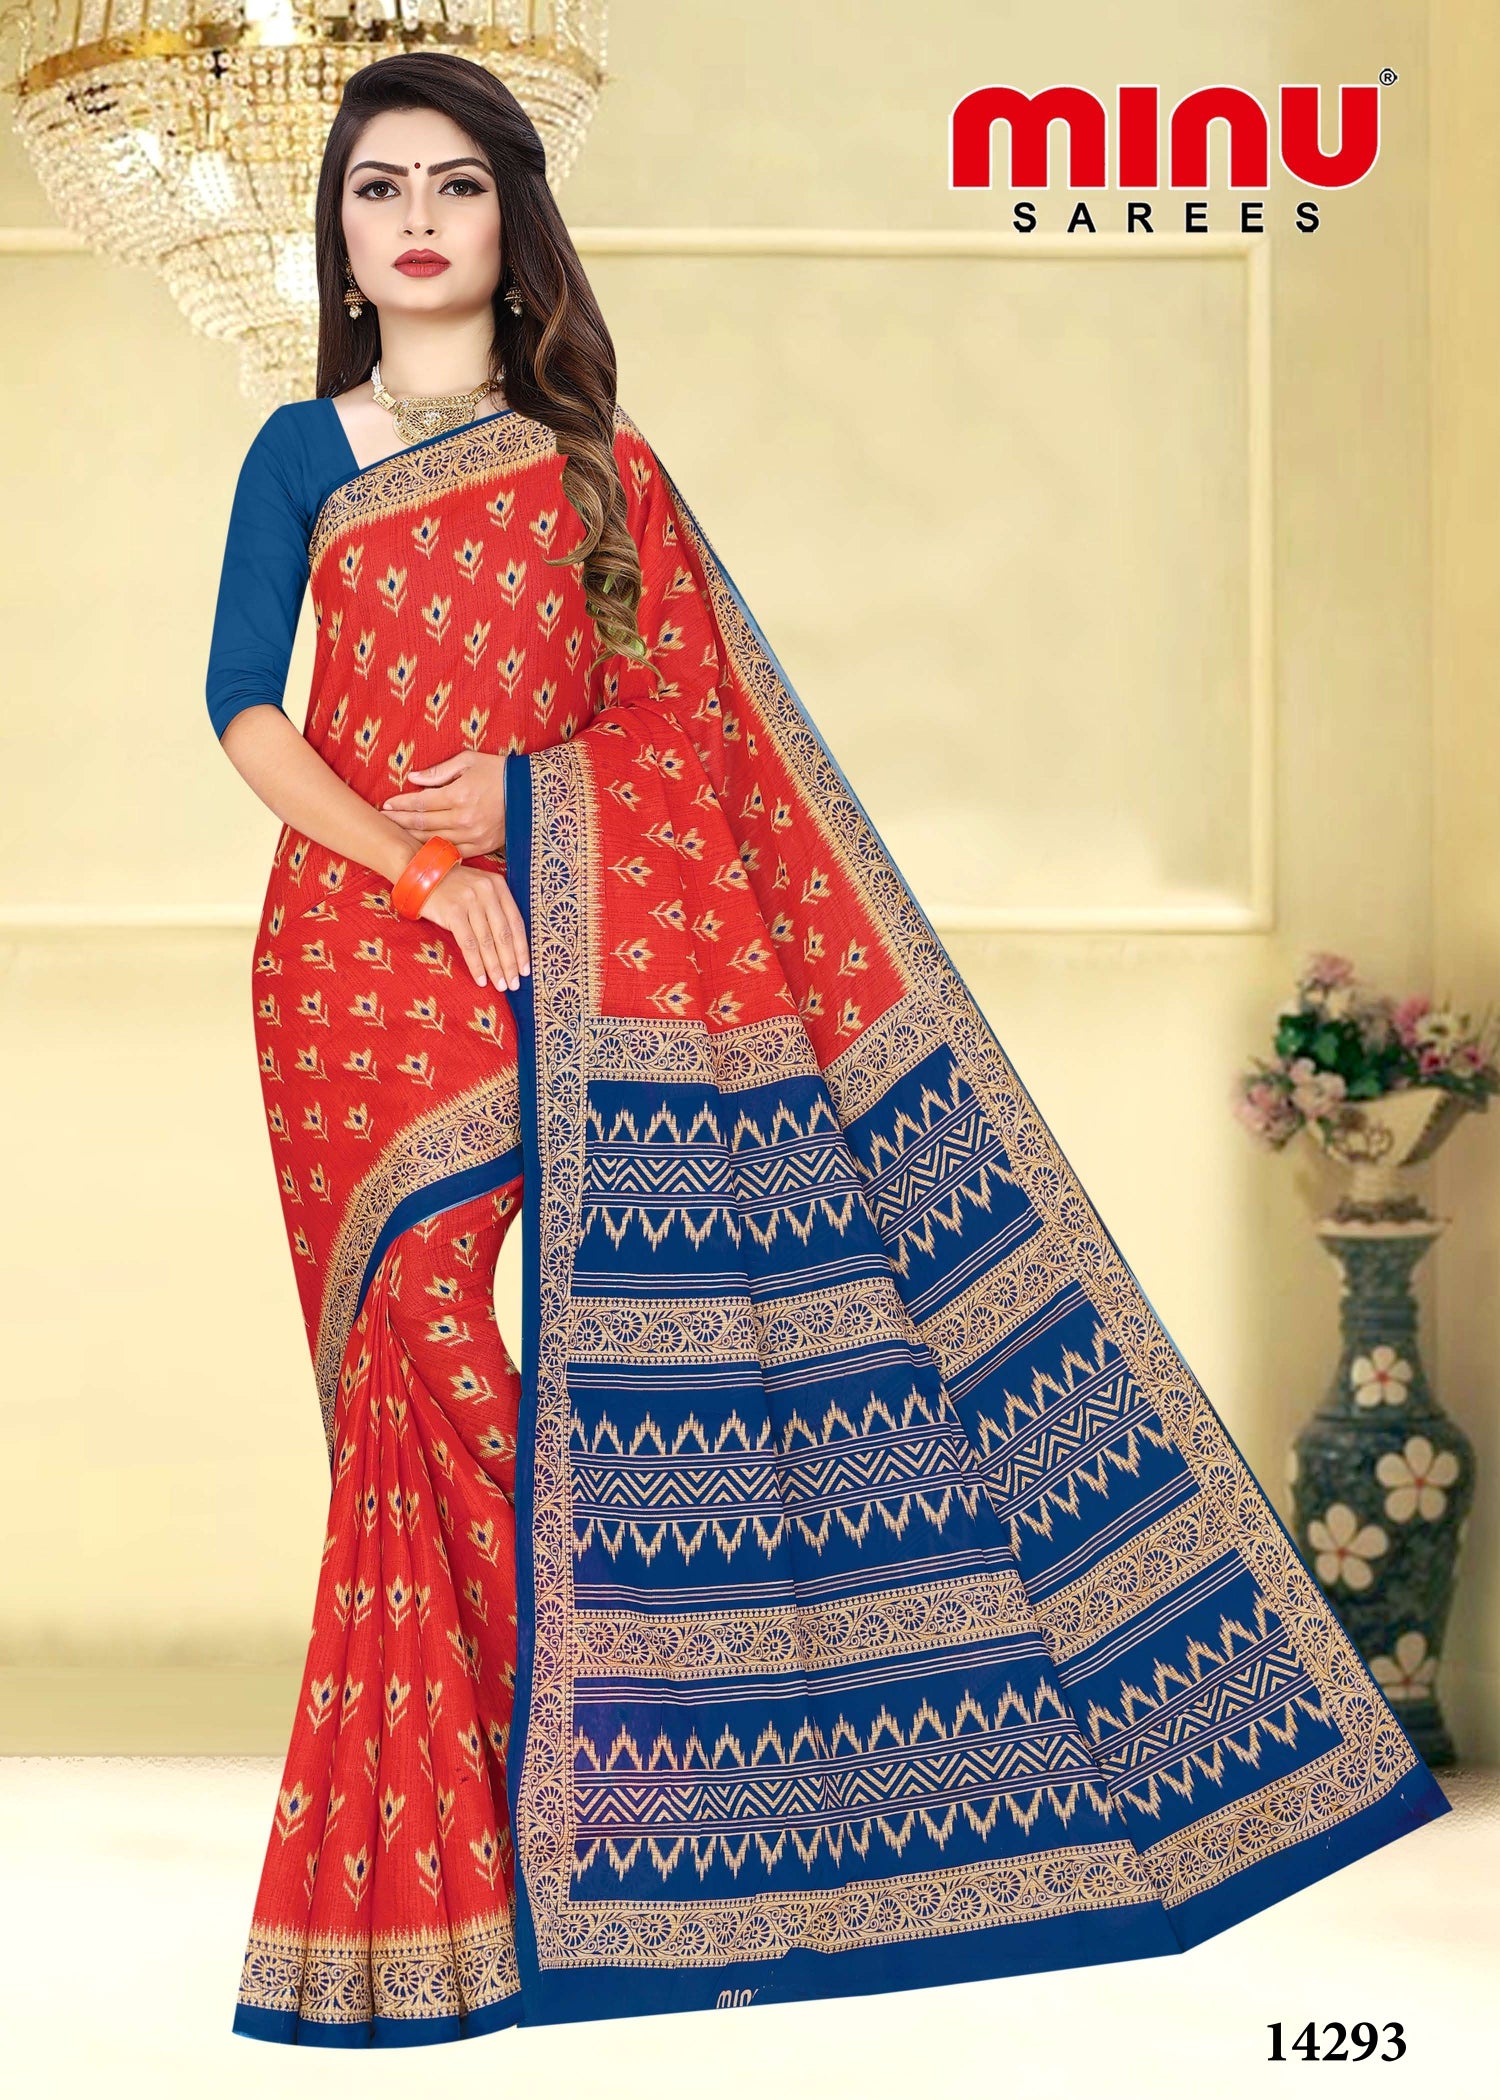 printed saree for women online image